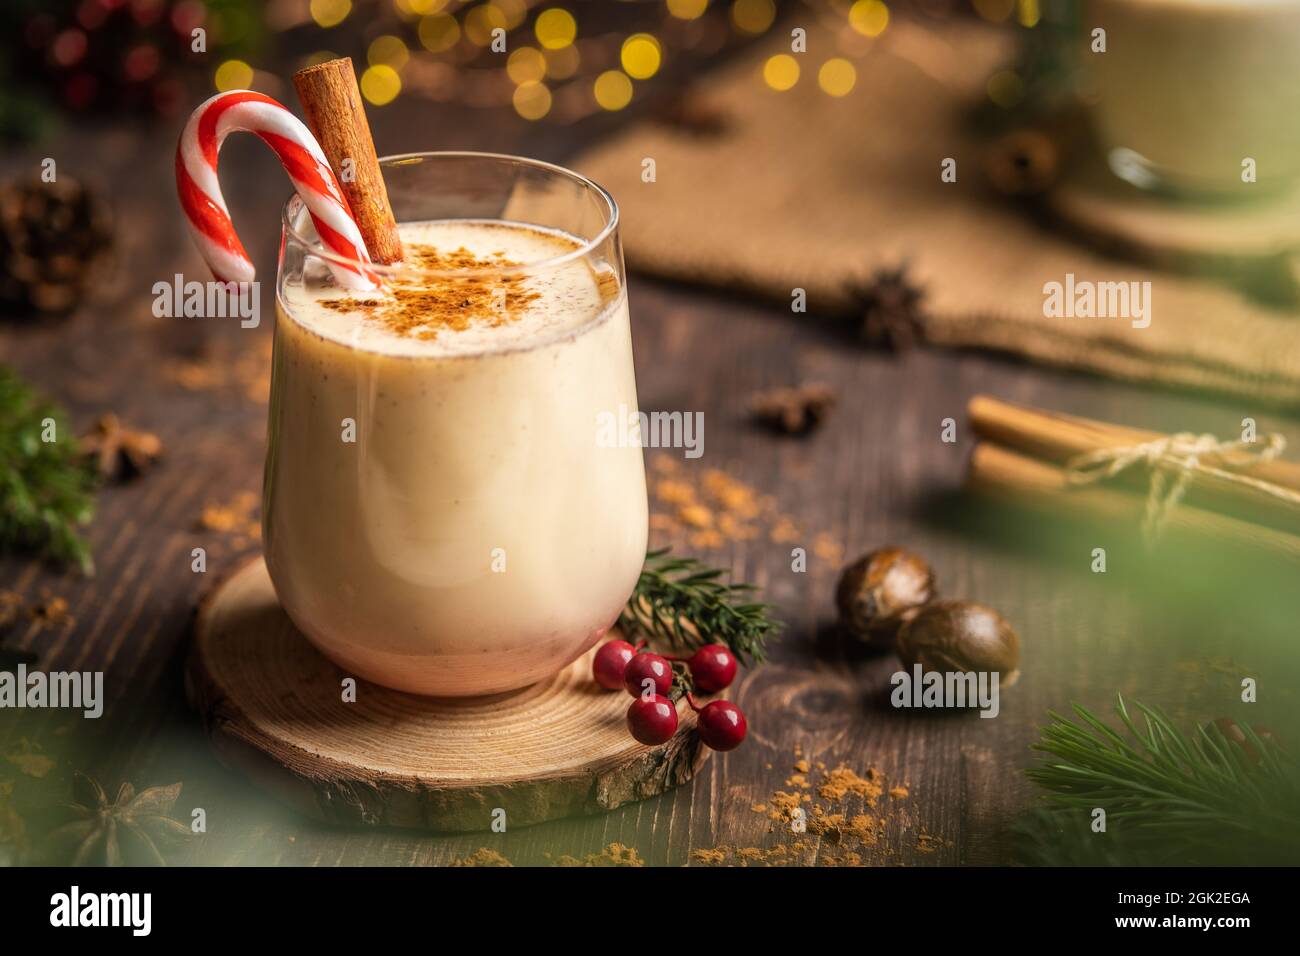 Eggnog with spicy cinnamon.Christmas and winter holidays,Cozy cocktail with cinnamon and candy cane,Traditional Christmas drink with grated nutmeg and Stock Photo